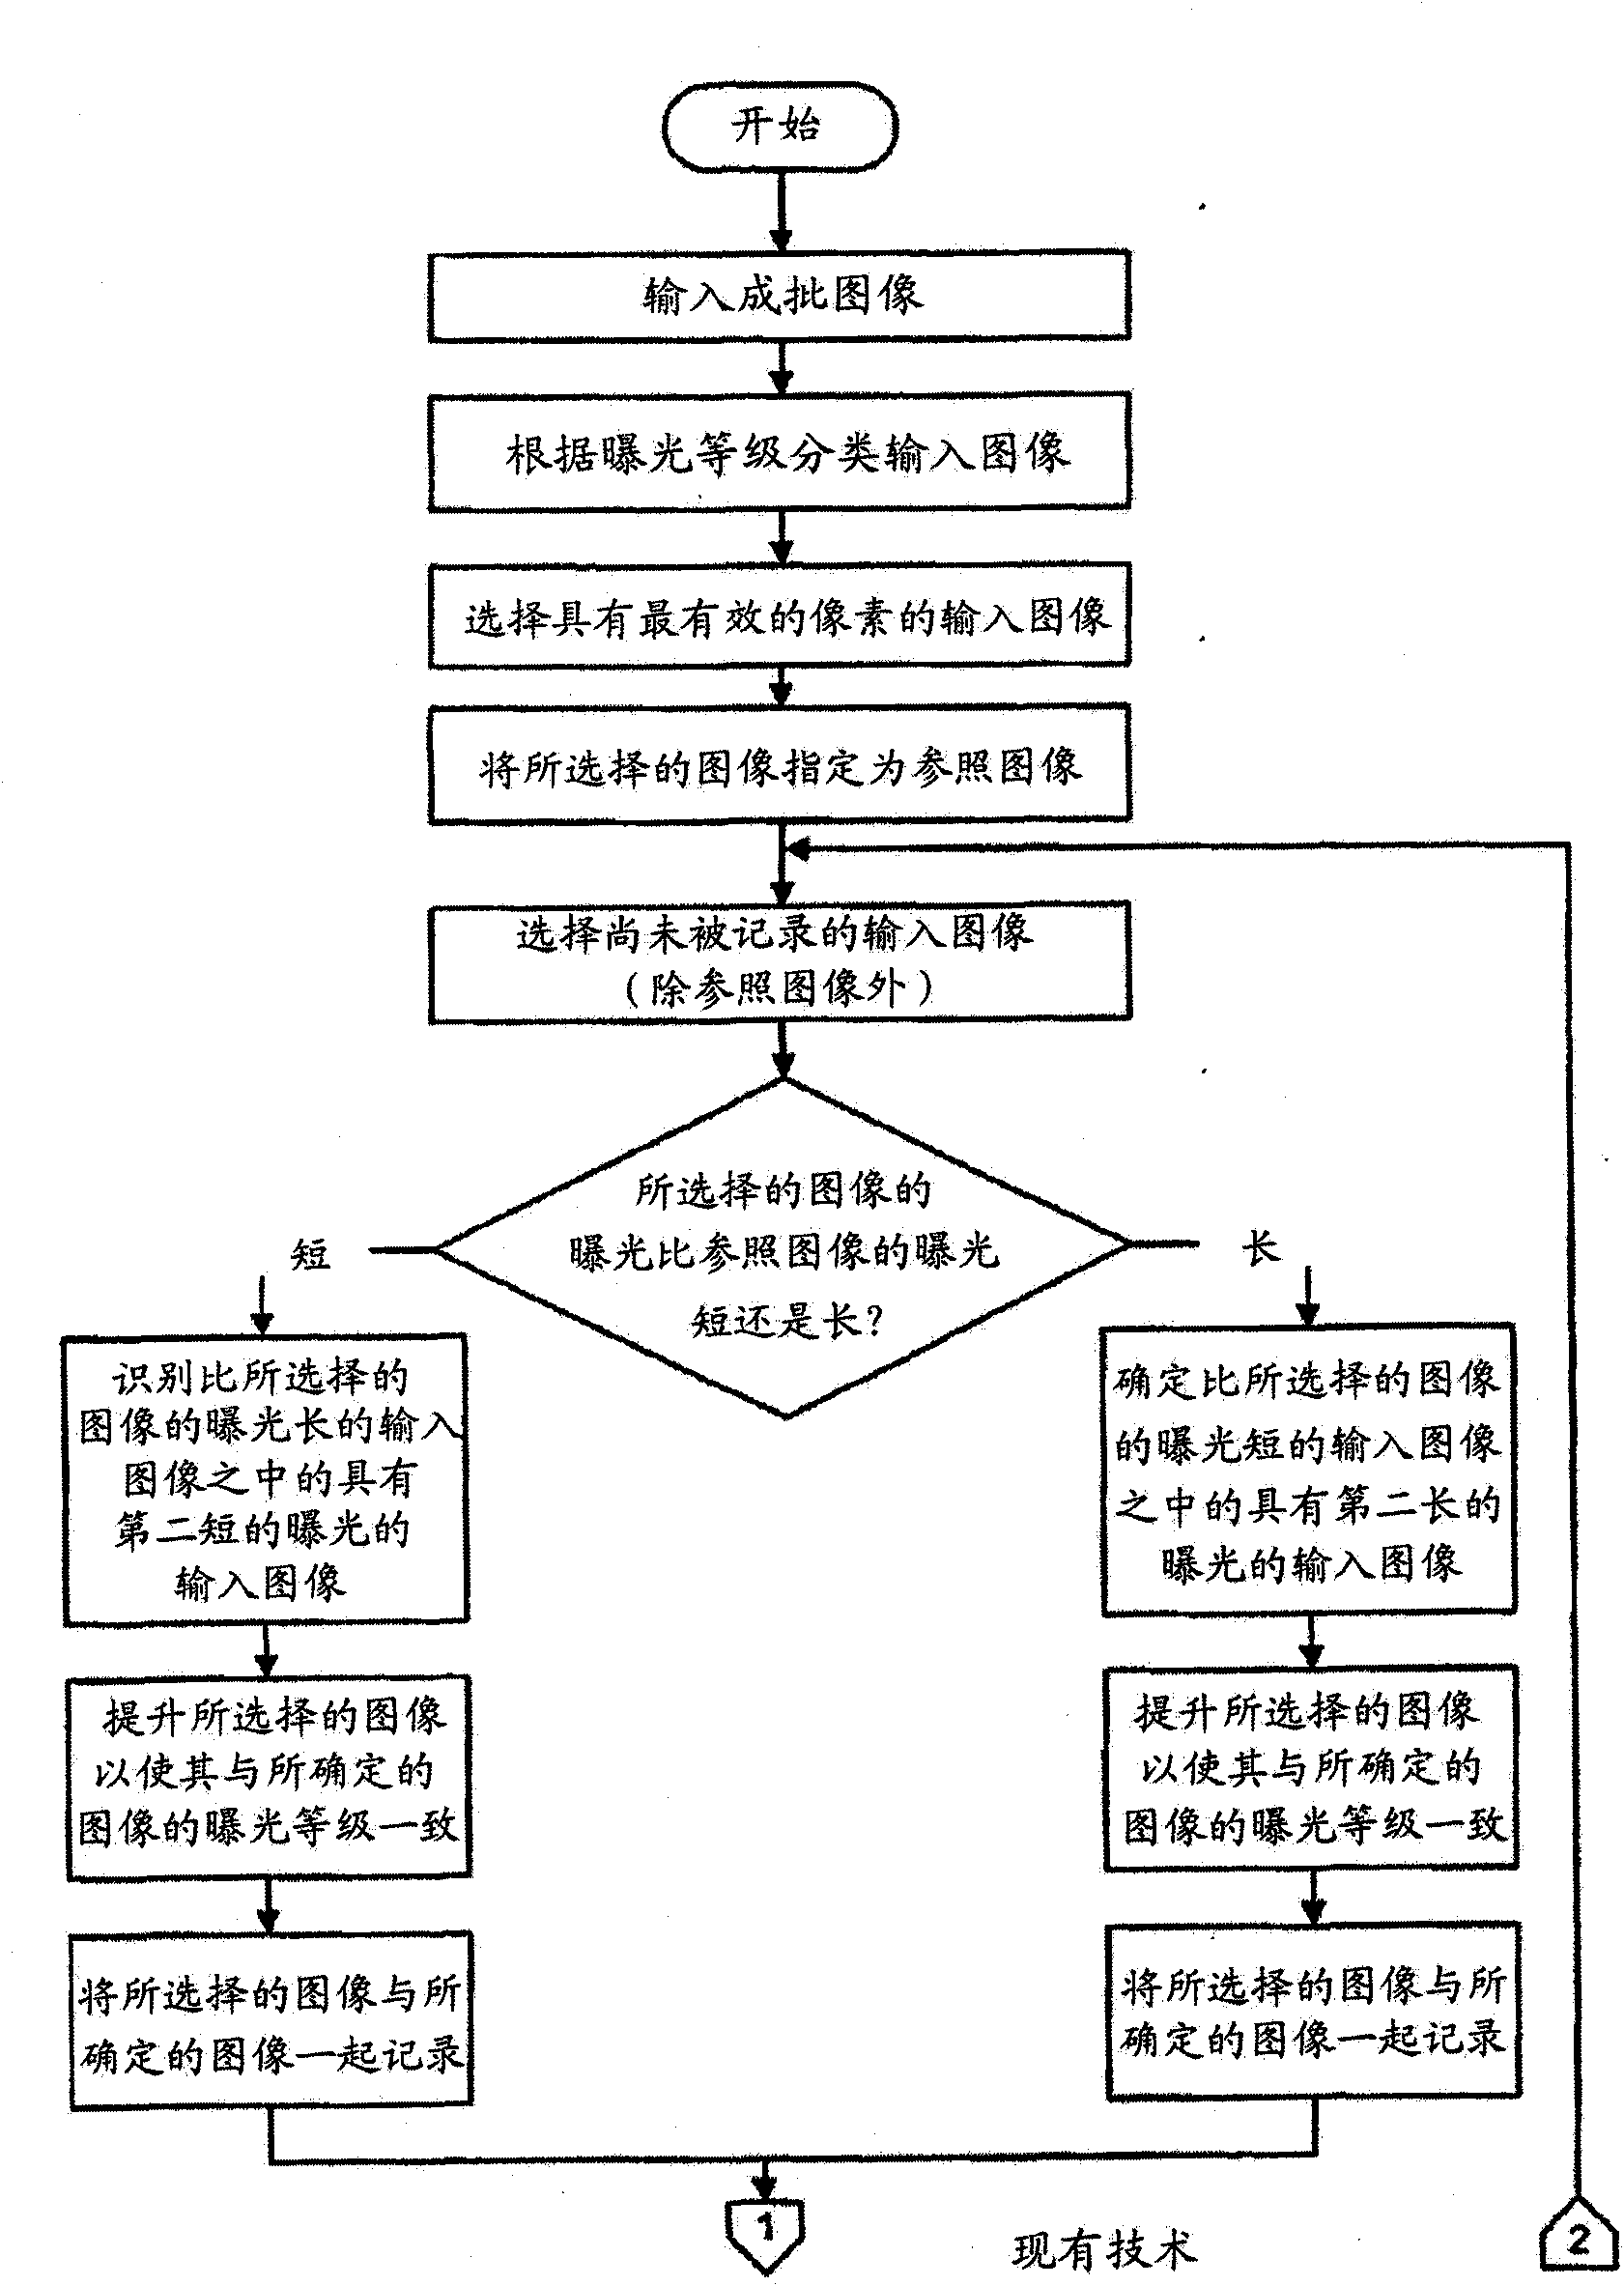 Method and apparatus for motion blur and ghosting prevention in imaging system